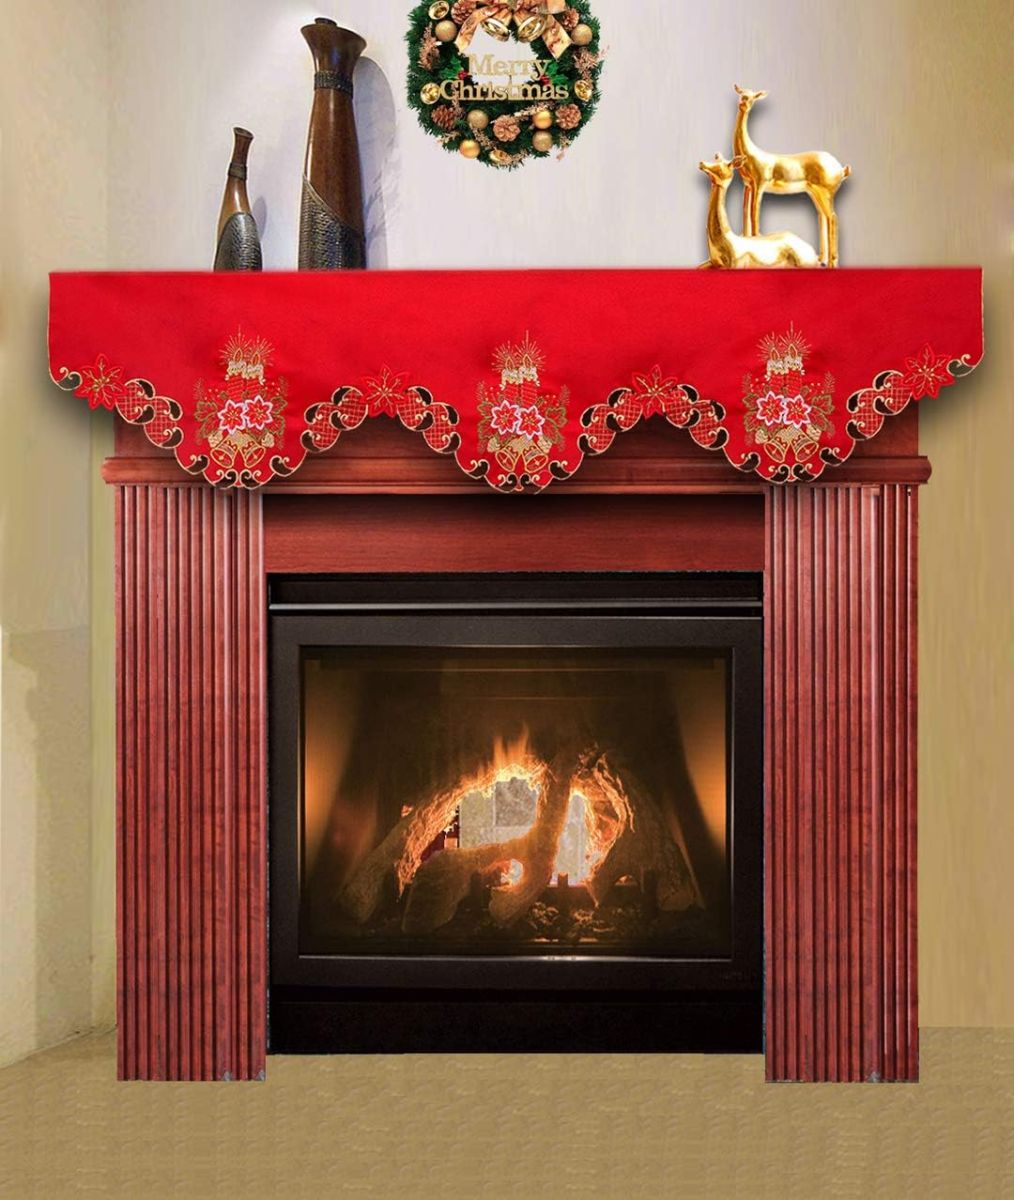 Grelucgo Christmas Holiday Mantel Scarf, Runner, Winter Decorations 69 by 17 Inch